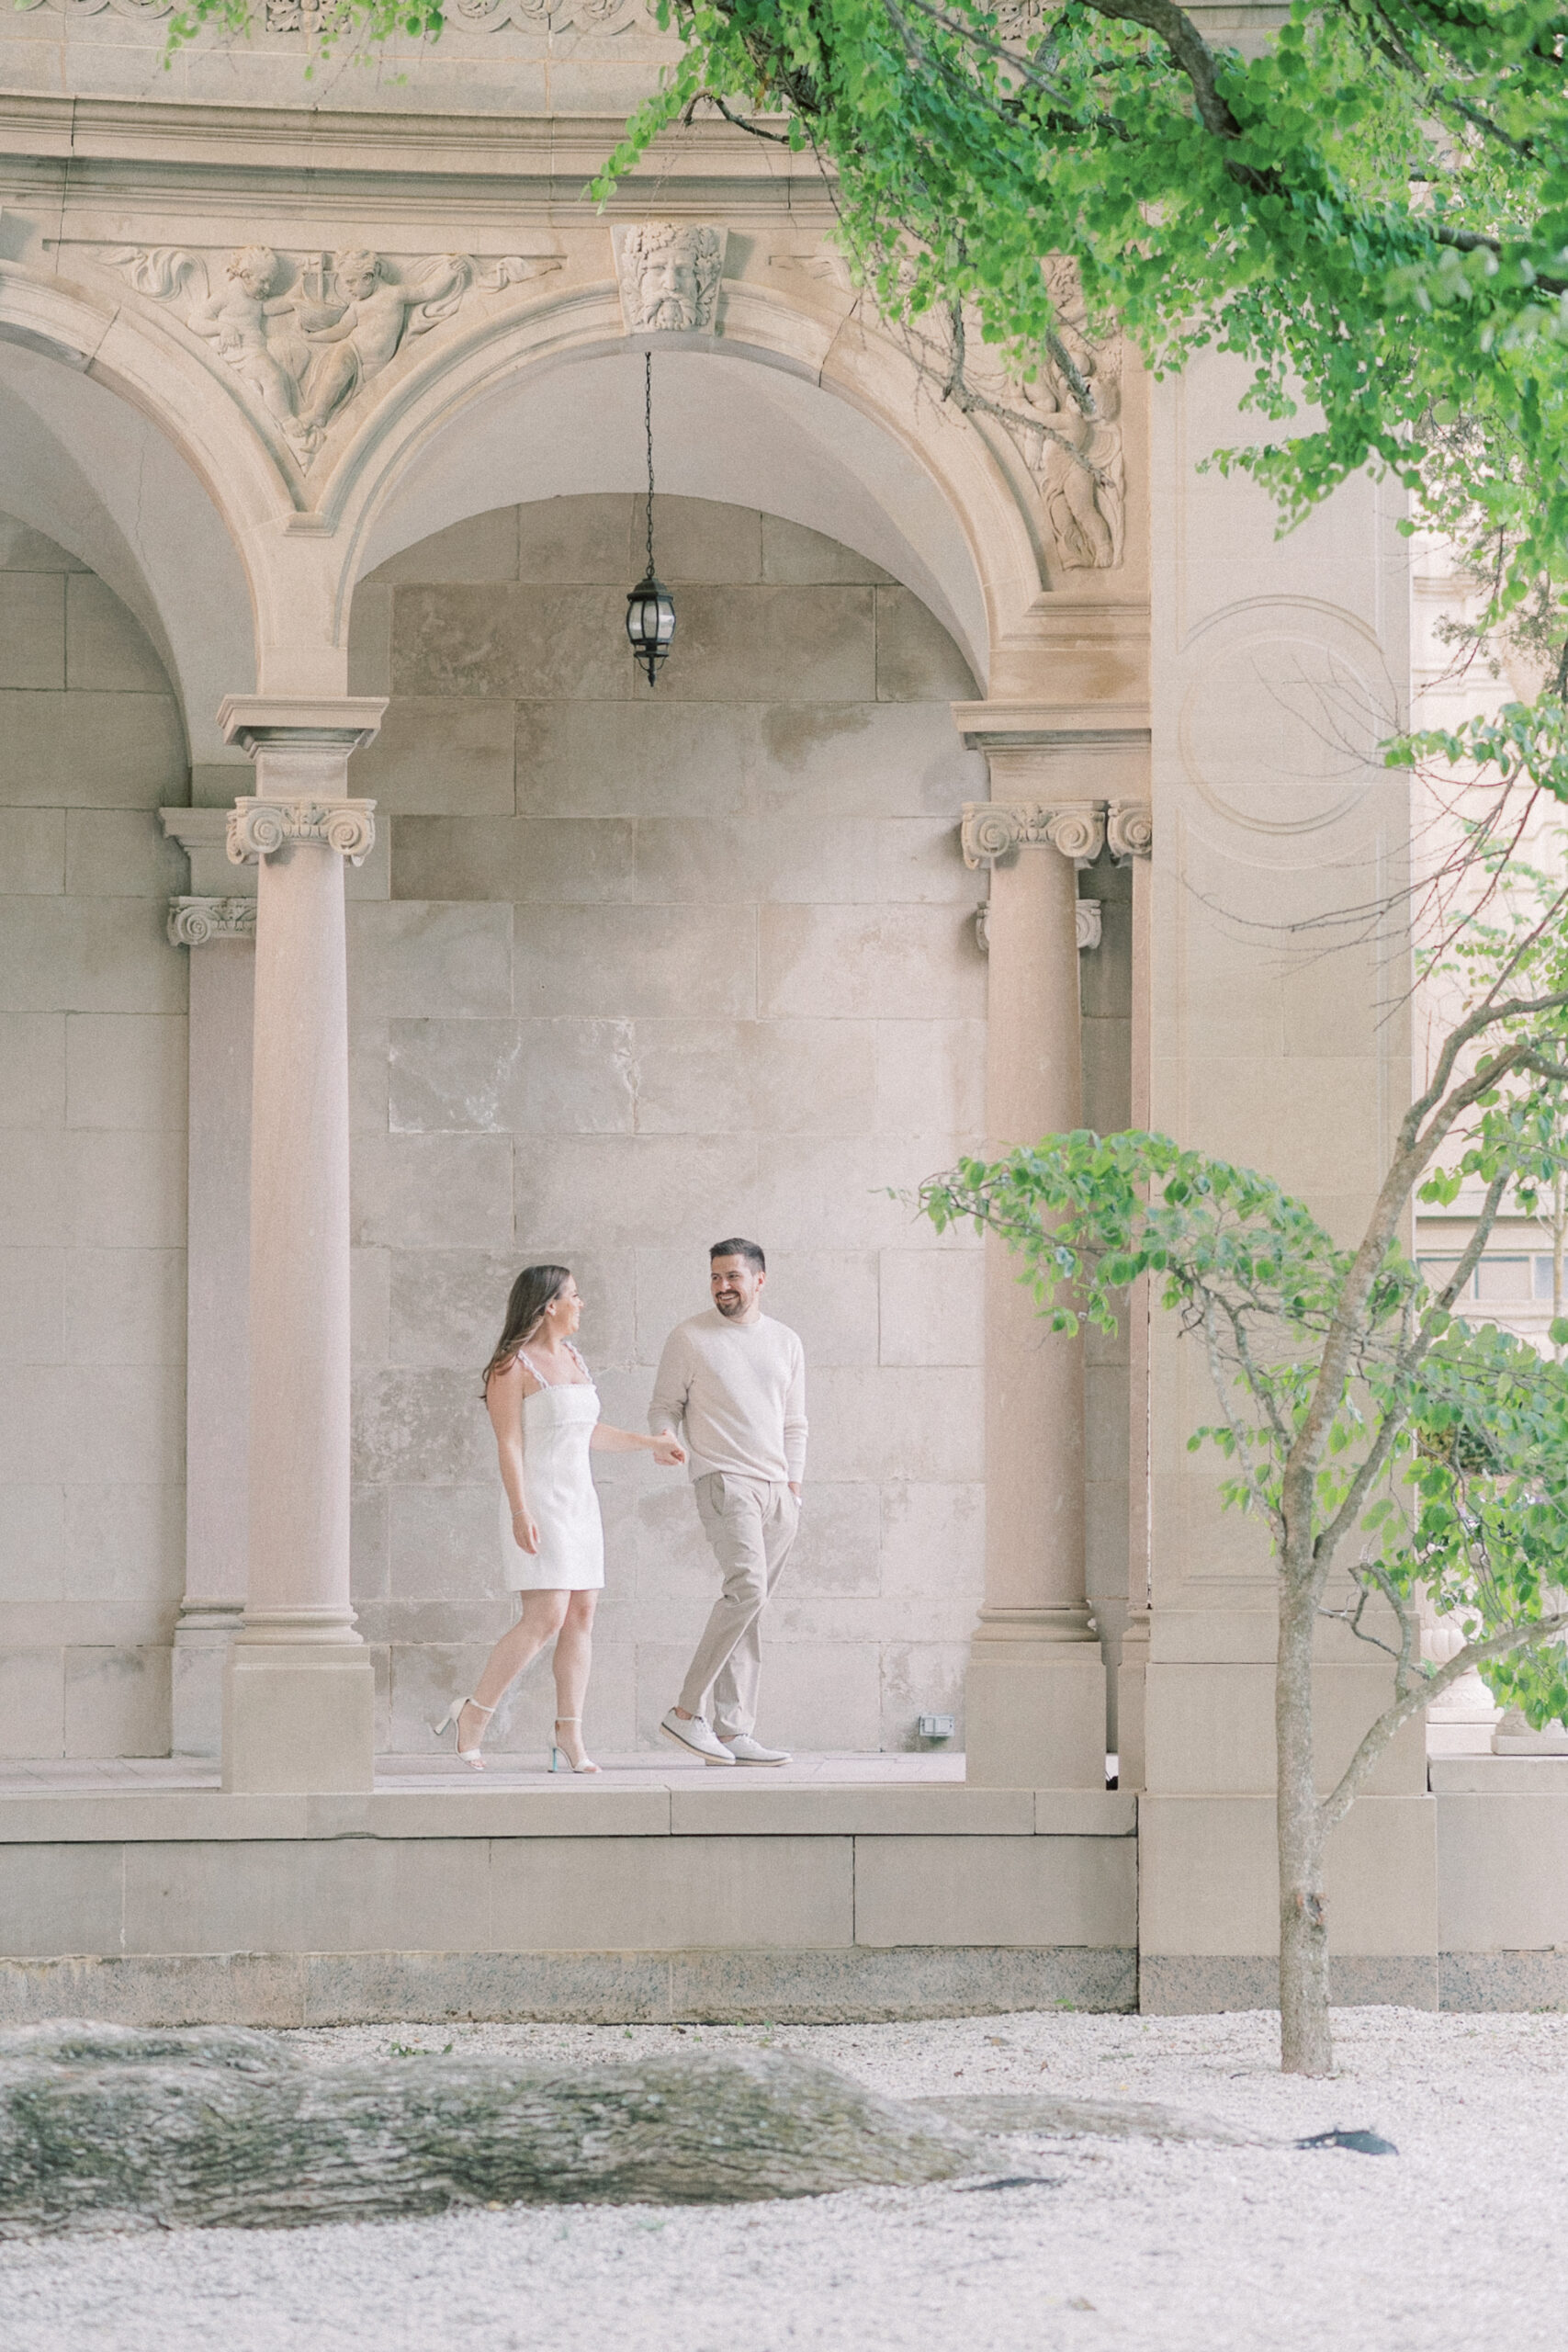 Ariel and Bryan’s romantic engagement session was set at Monmouth University in Monmouth New Jersey photographed by New Jersey Wedding Photographer, Michelle Behre Photography. For more New Jersey engagement session inspiration and New York engagement ideas, outfits, locations, and inspiration, visit our blog!